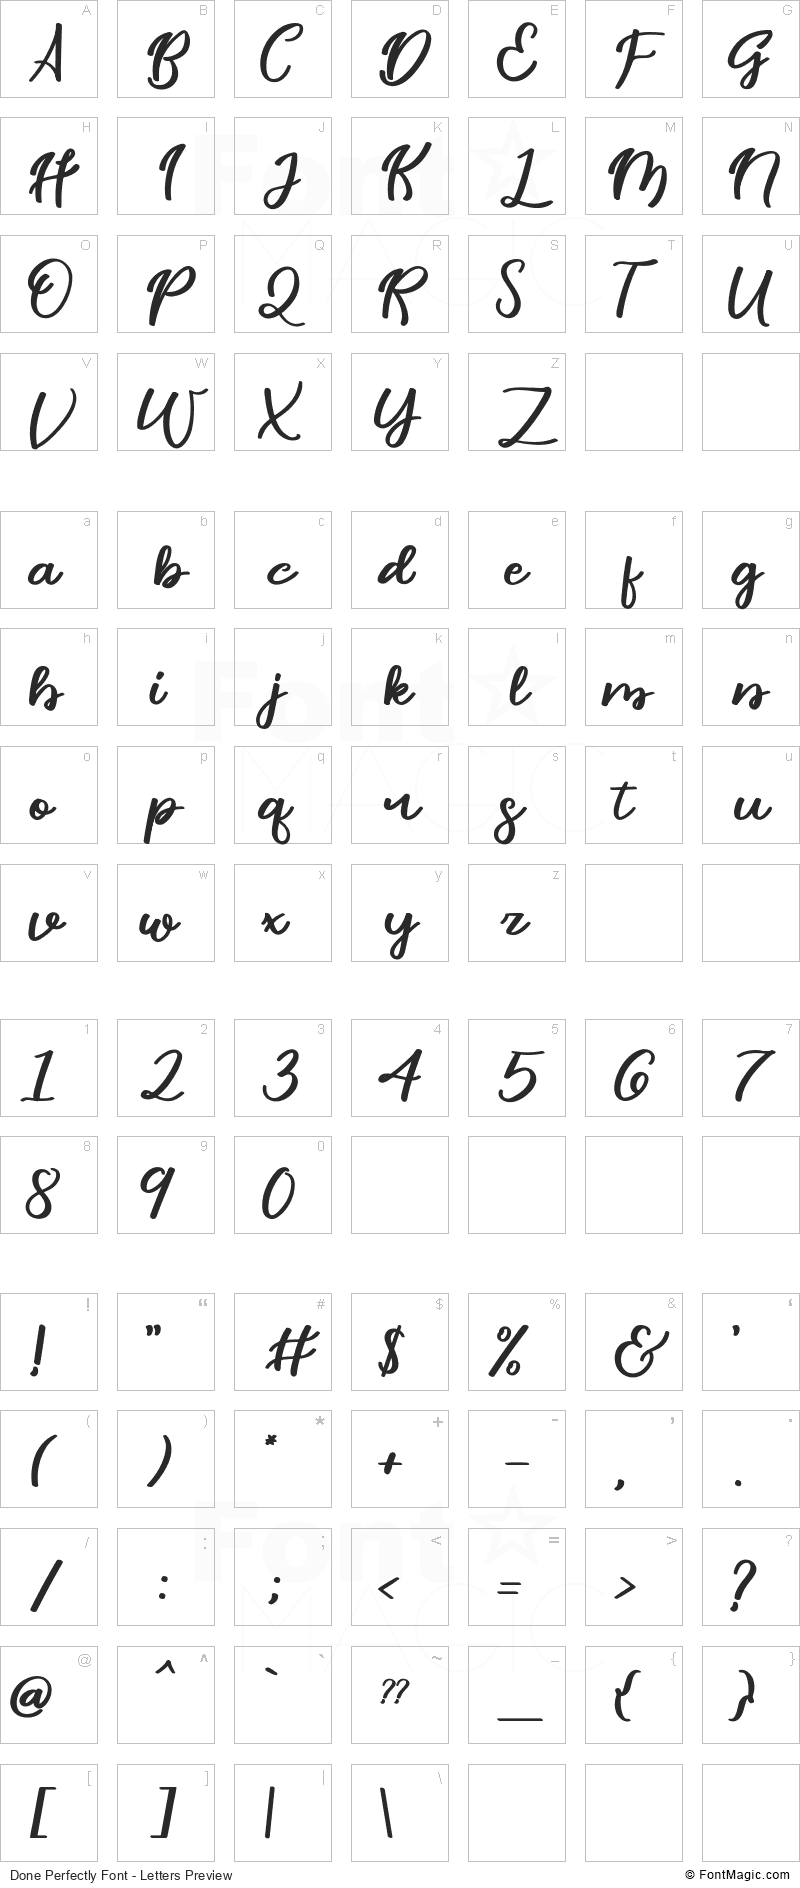 Done Perfectly Font - All Latters Preview Chart